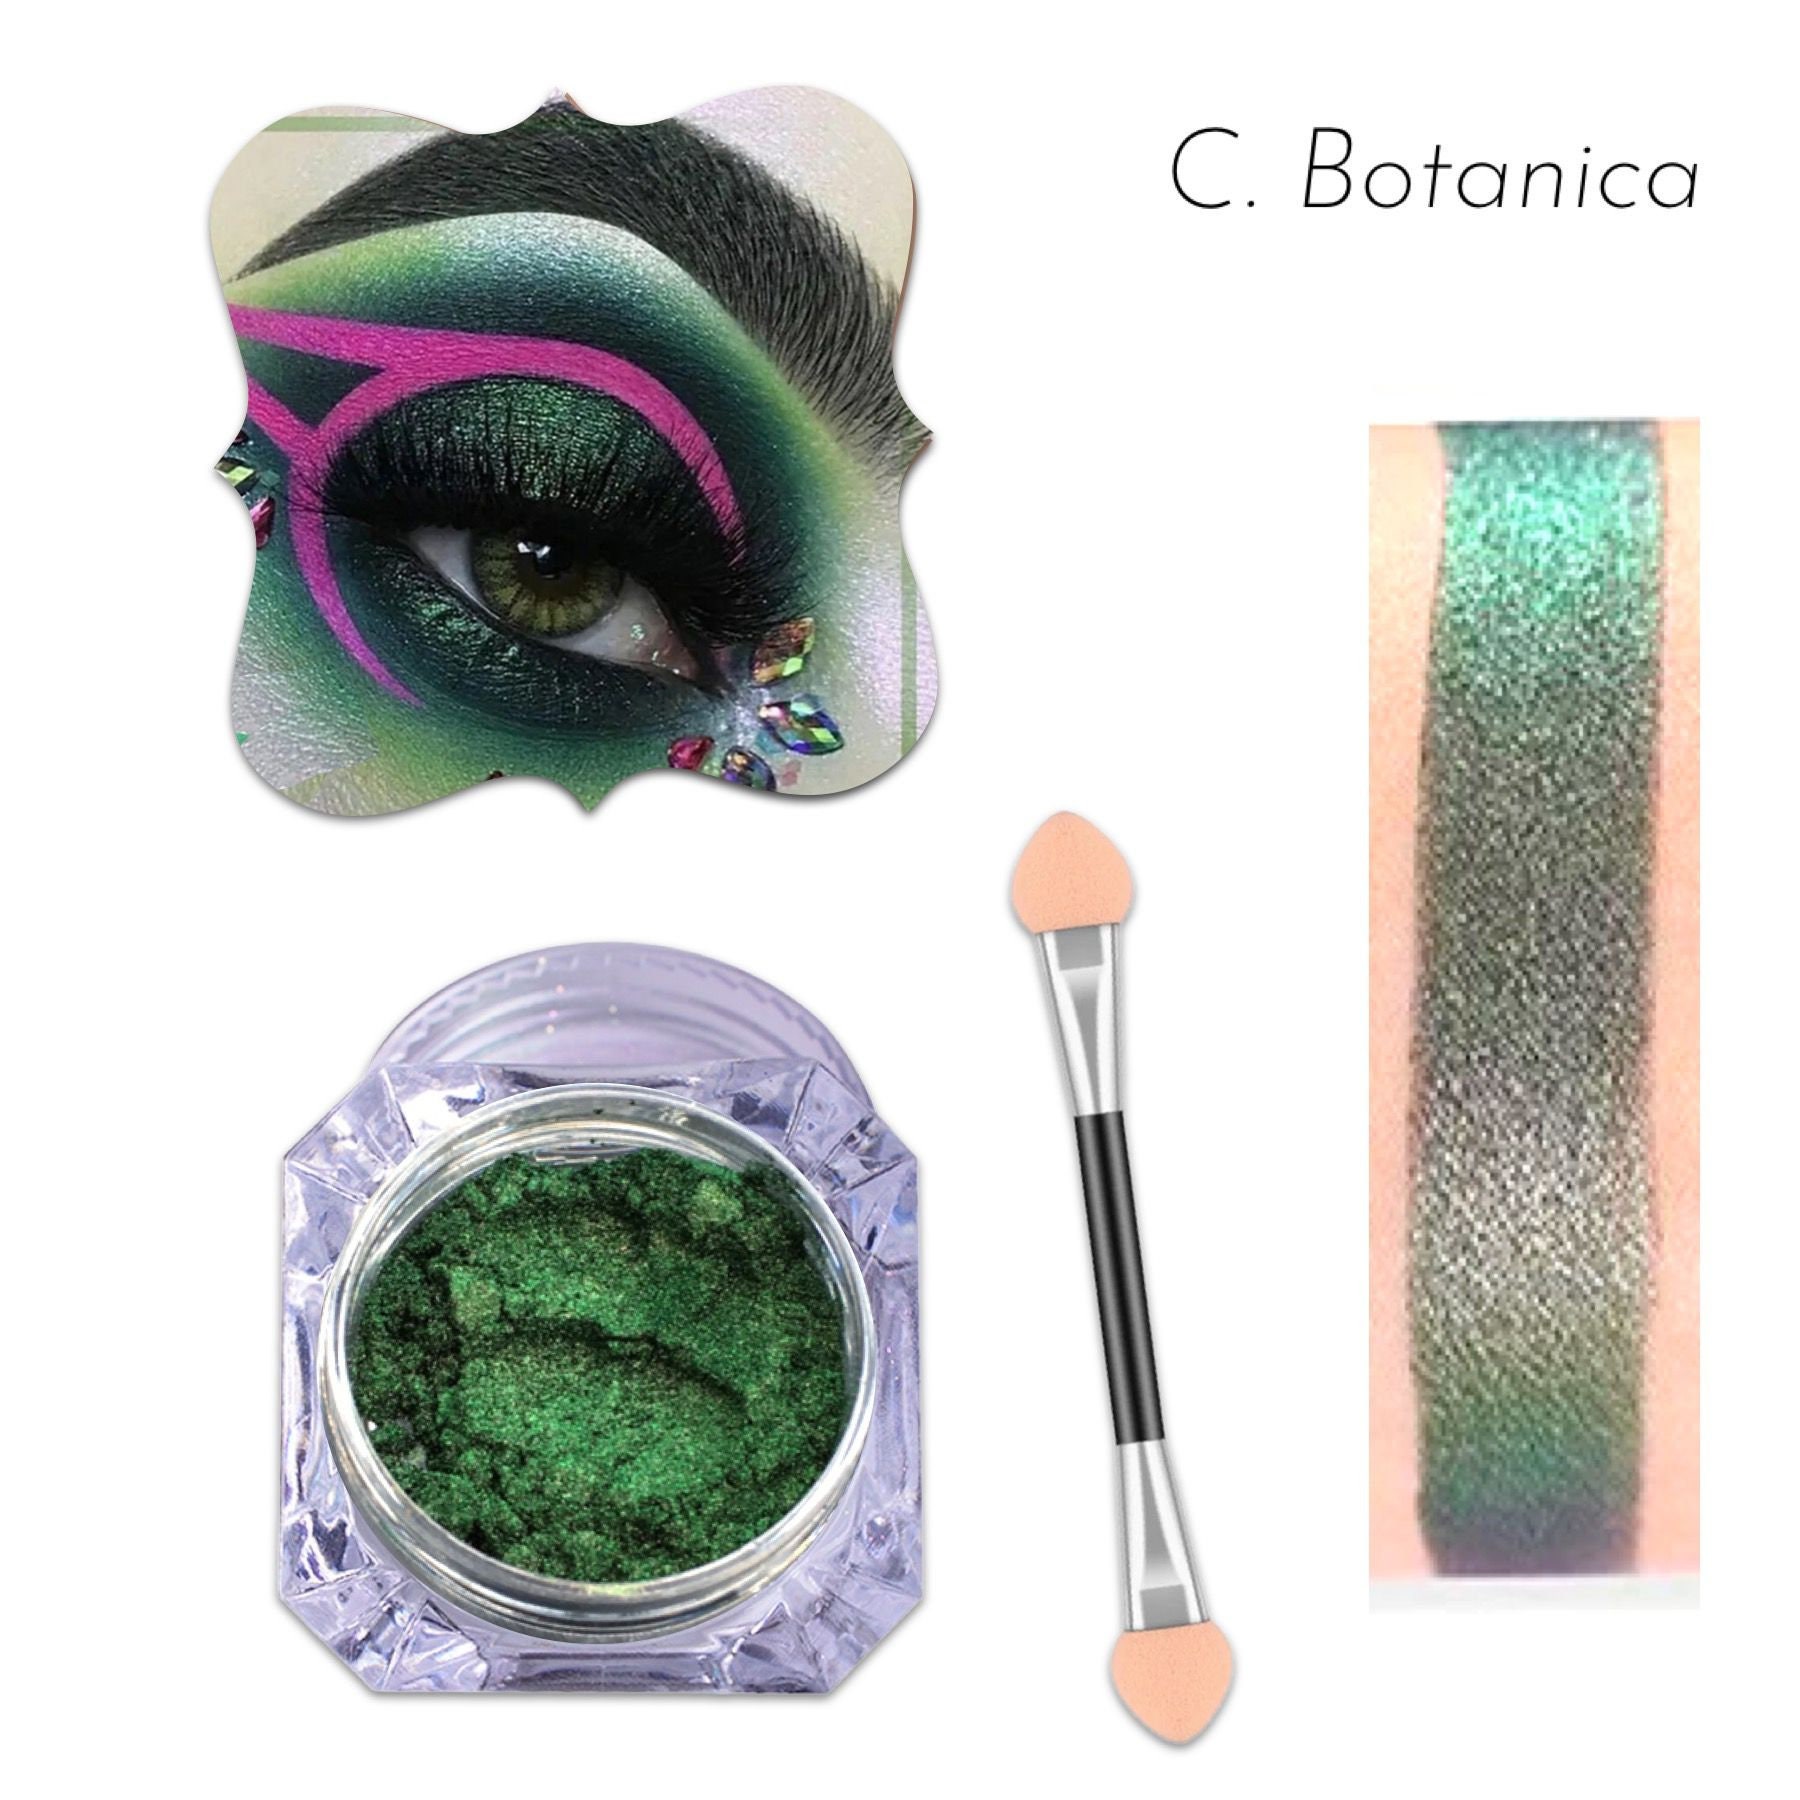 Multichrome Pigment Shiny Chameleon Eyeshadow Face Body Makeup Shining  Aurora Mirror Colour Shifting Multi Duo Chrome Painting Loose Powder 